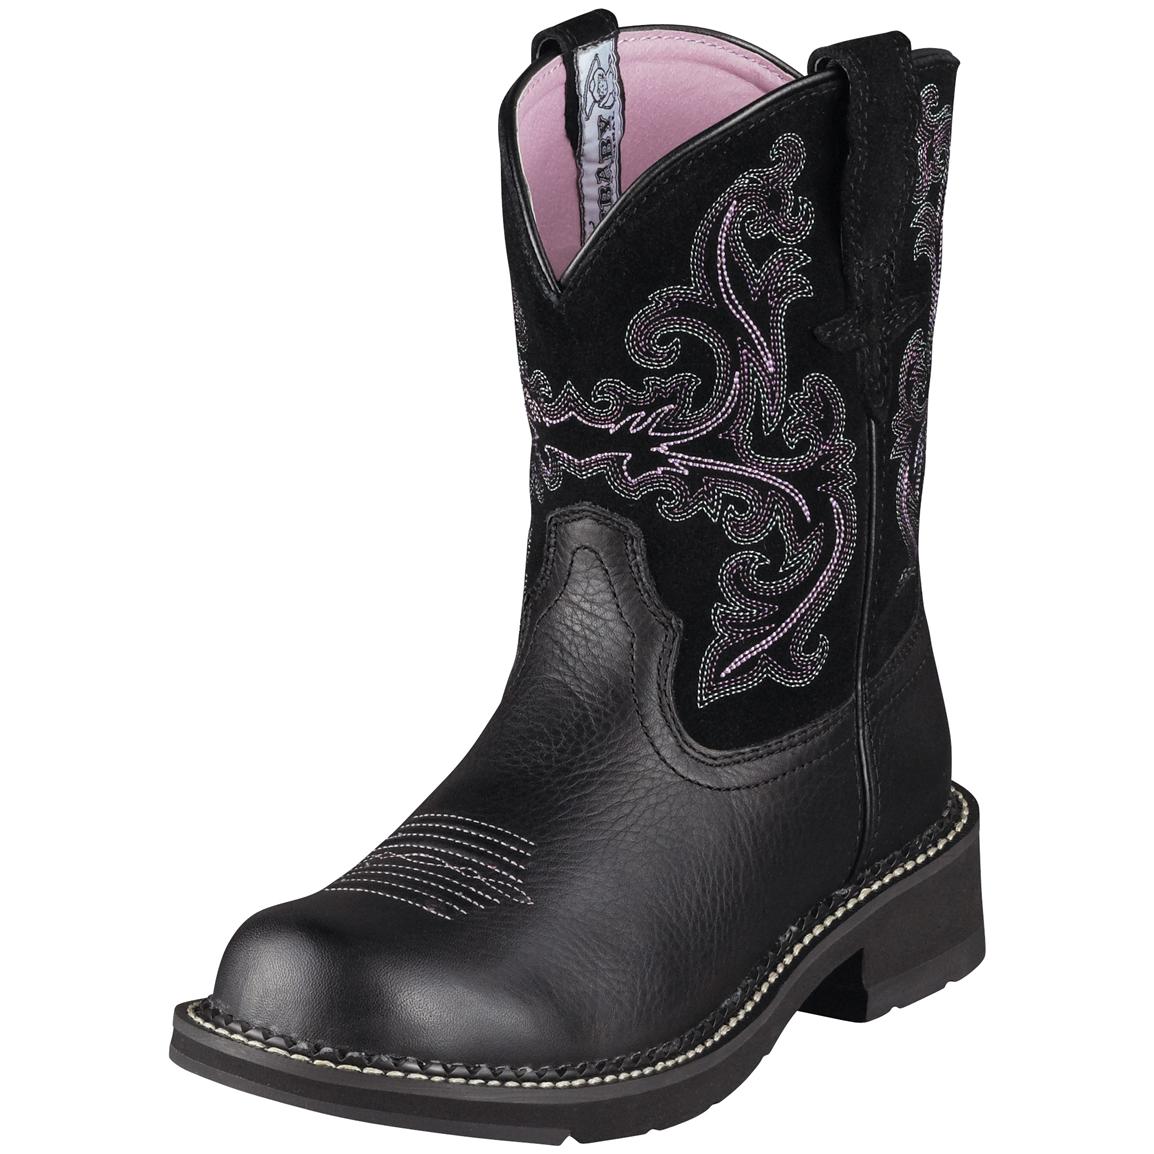 Black Ariat Fat Baby Boots 13